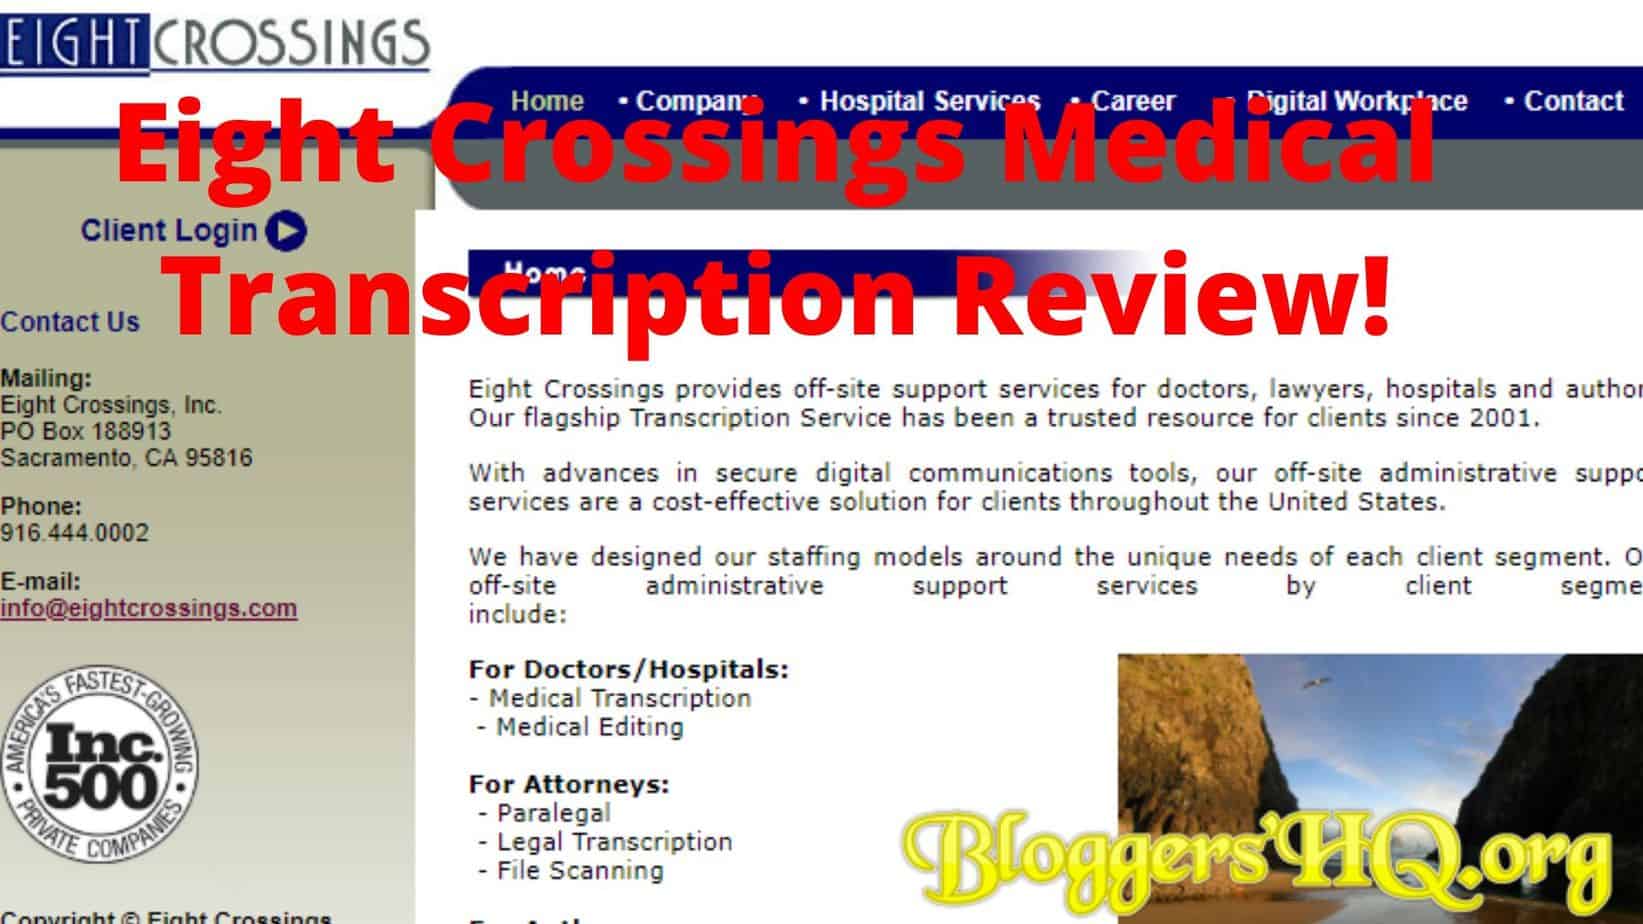 Eight Crossings Medical Transcription Review